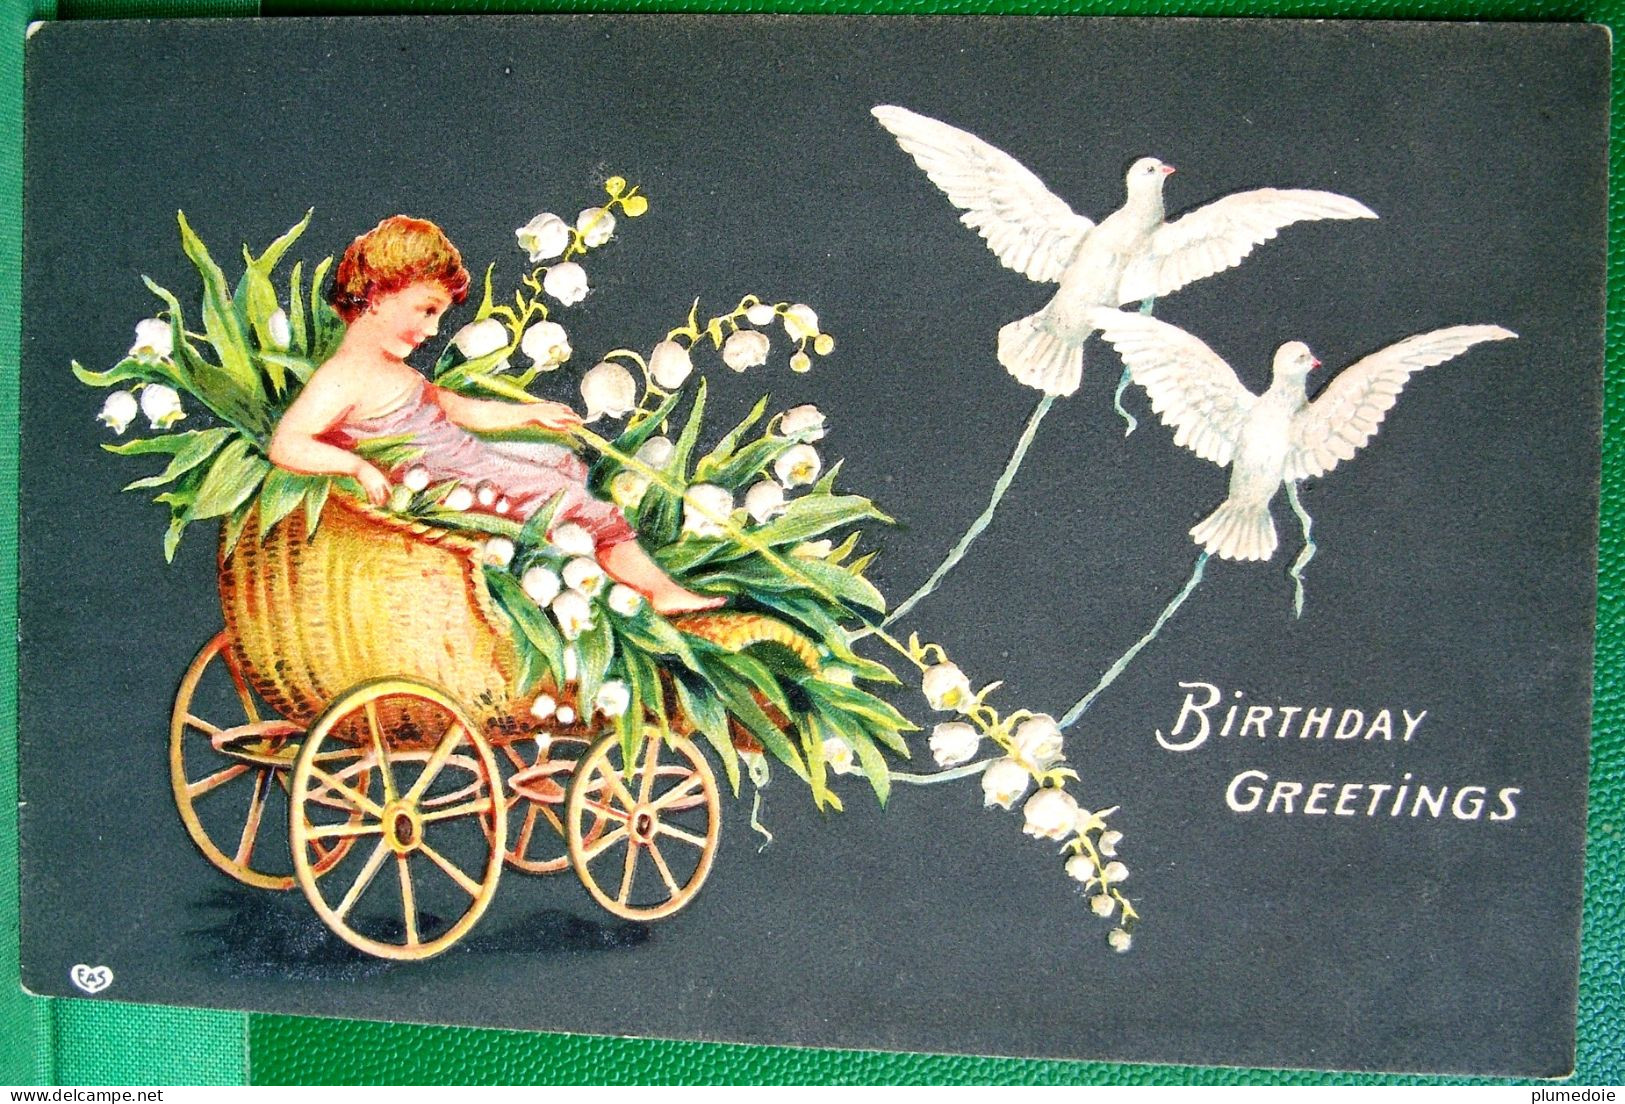 Cpa Gaufree CHAR DE MUGUET CHERUBIN COLOMBE FLEURS 1911, LILY OF THE VALLEY DOVE CART CHILD Embossed  OLD EAS PC - Engel